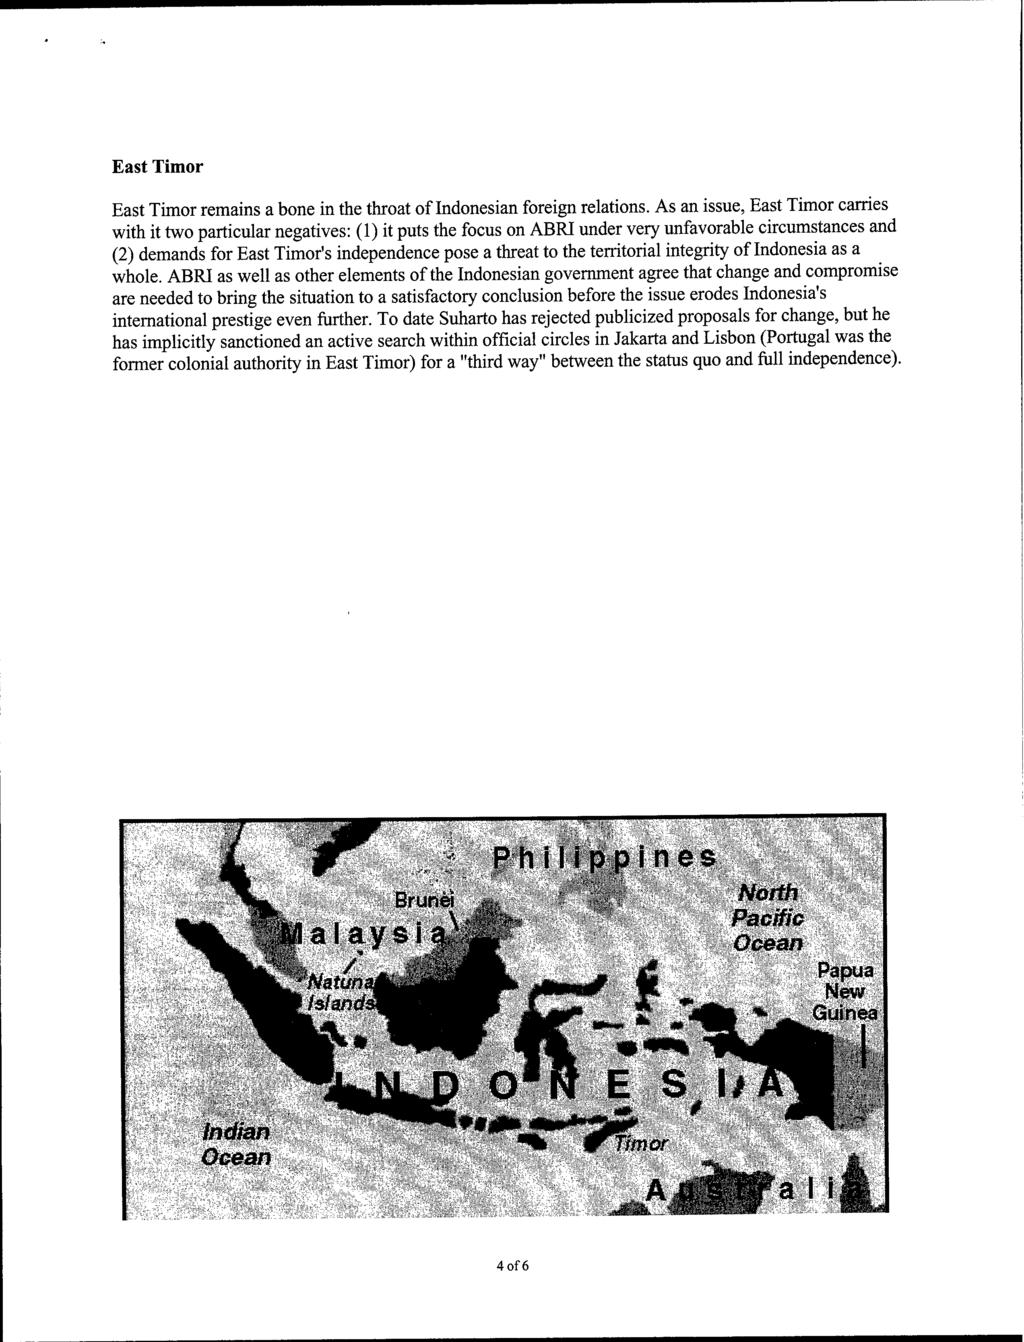 East Timor East Timor remains a bone in the throat of Indonesian foreign relations.